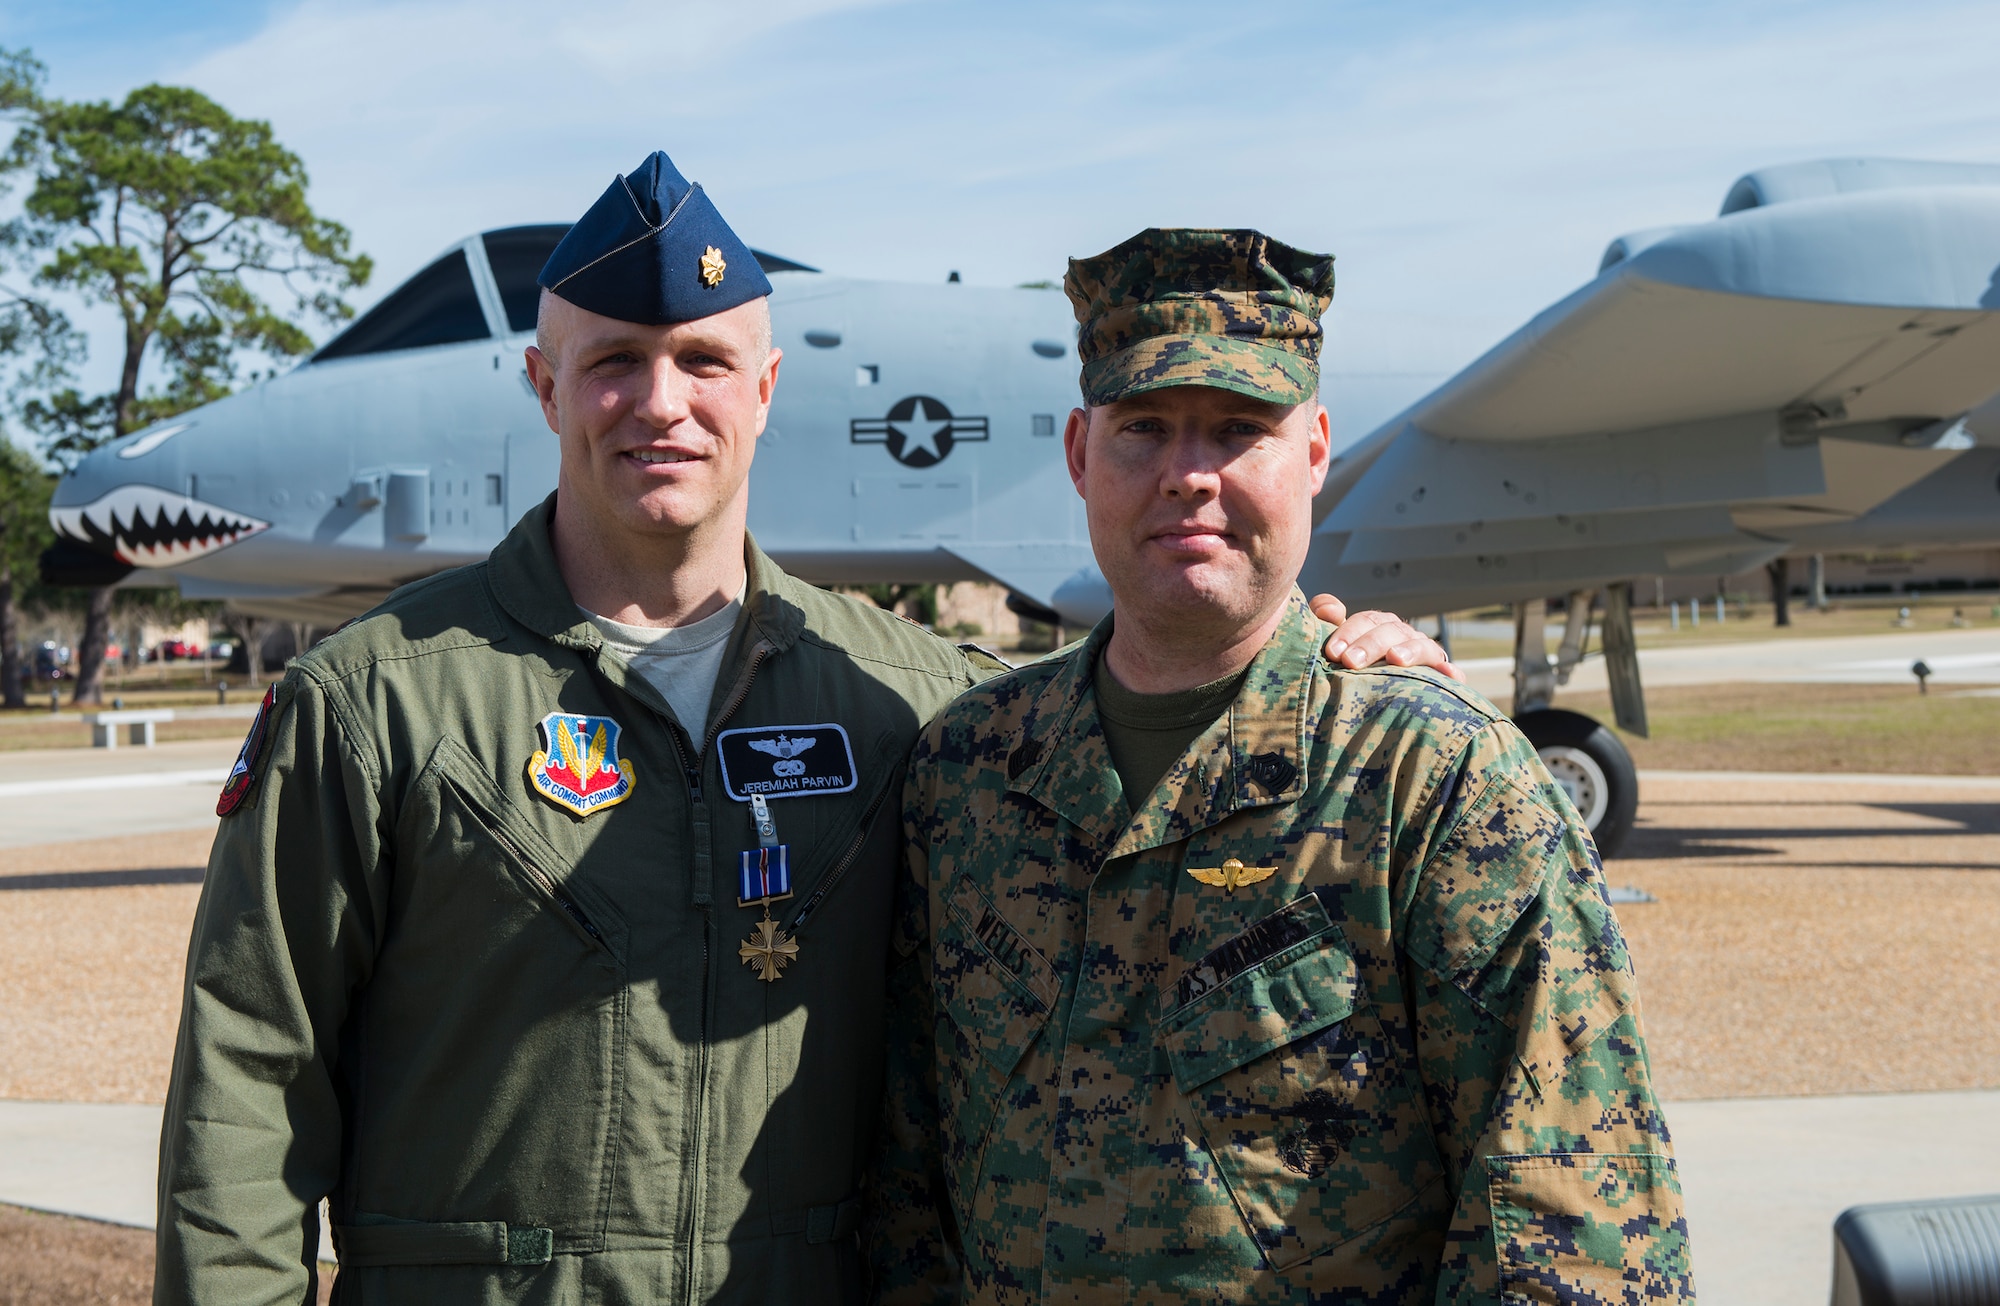 U.S. Air Force Maj. Jeremiah ‘Bull’ Parvin, 75th Fighter Squadron director of operations, and U.S. Marine Corps Master Gunnery Sgt. Richard Wells, senior enlisted advisor of Marine Special Operations School, pose for a photo Jan. 29, 2015, at Moody Air Force Base, Ga. Parvin received the Distinguished Flying Cross with Valor for his heroic actions that saved the lives of Wells’ team during a 2008 deployment to Afghanistan. (U.S. Air Force photo by Airman 1st Class Ceaira Tinsley/Released)